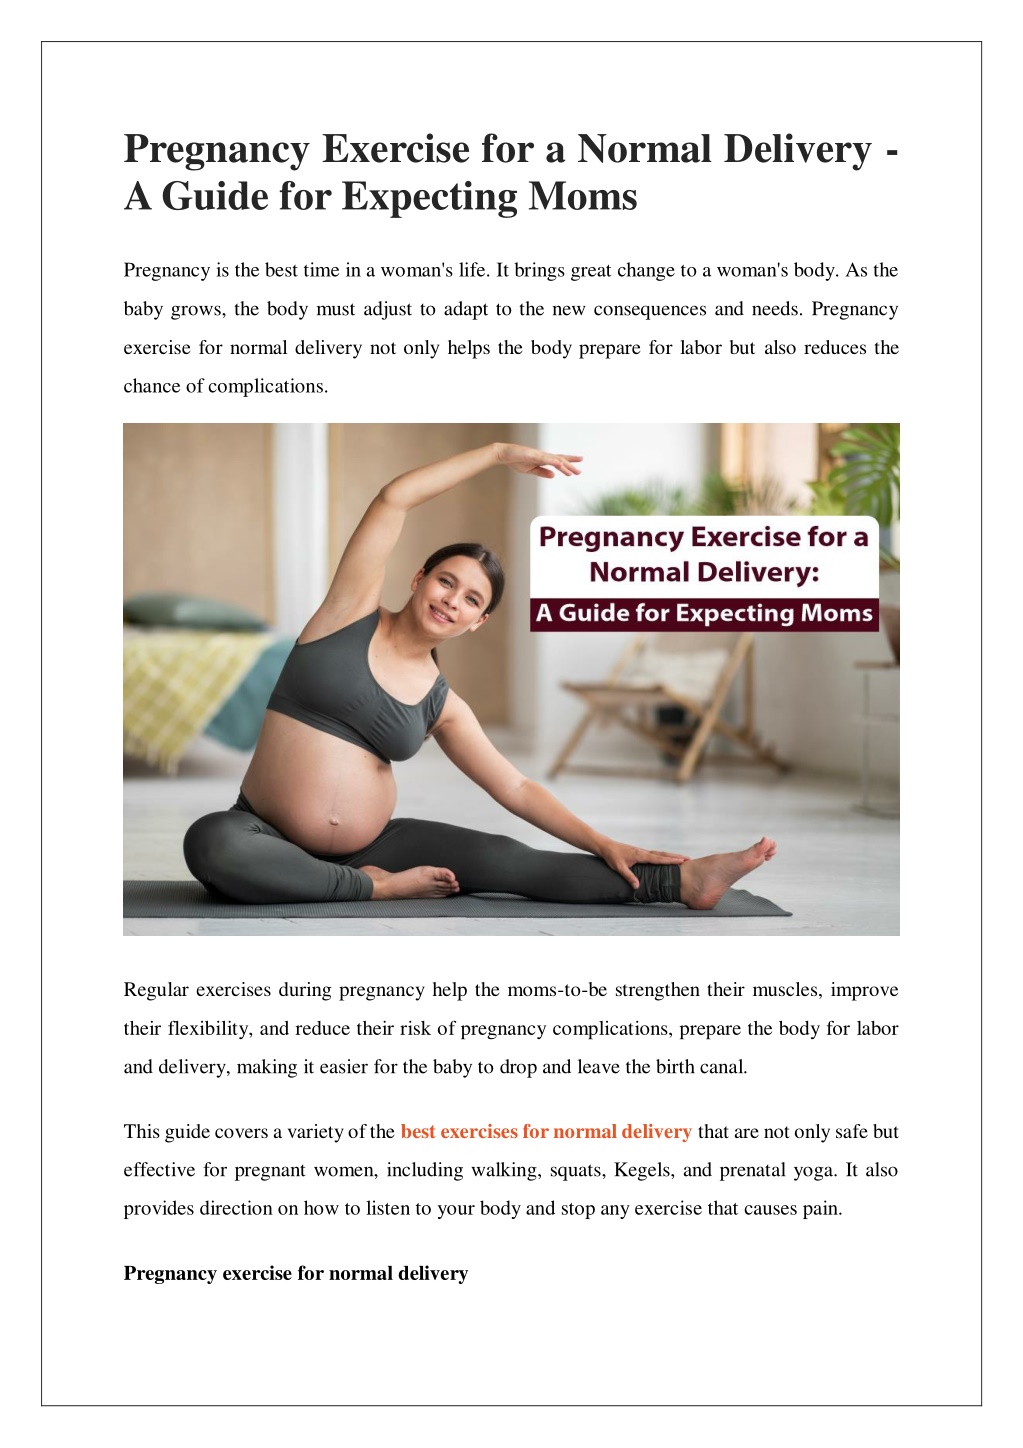 PPT - Pregnancy Exercise for a Normal Delivery - A Guide for Expecting Moms  PowerPoint Presentation - ID:12686542